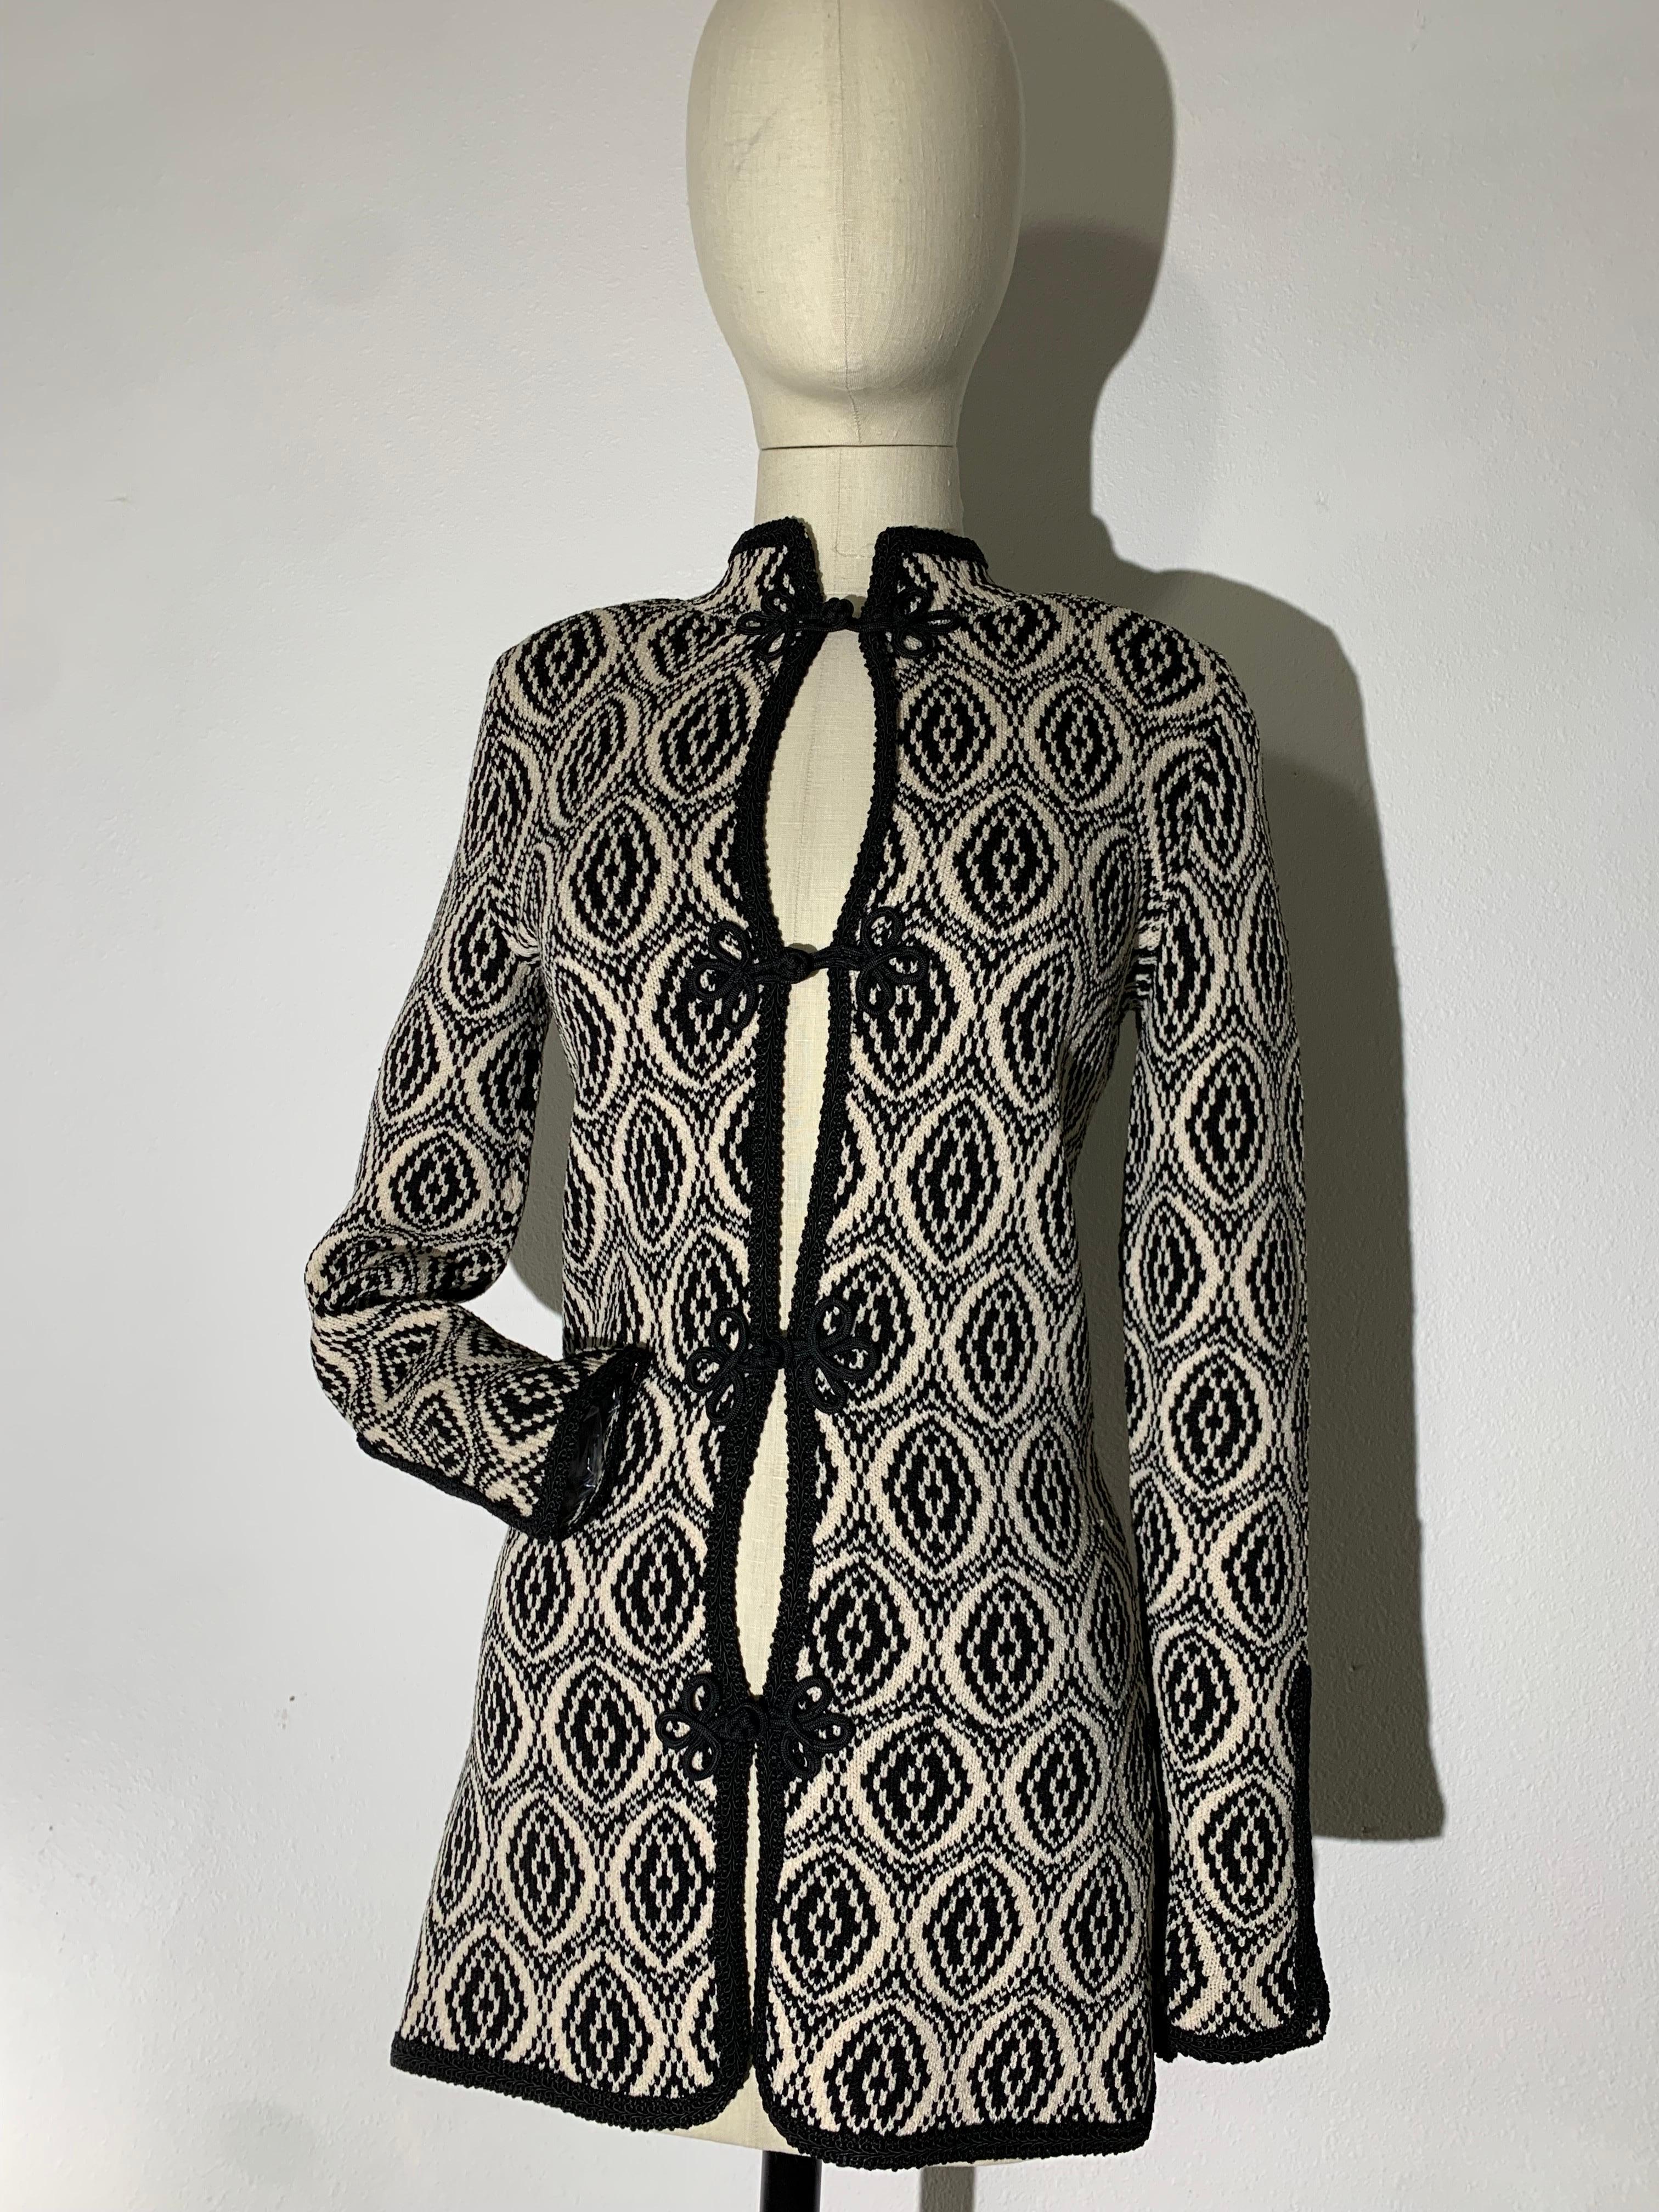 1970s Adolfo Black/White Arabesque Pattern Knit Tunic Jacket w Frog Closures In Excellent Condition For Sale In Gresham, OR